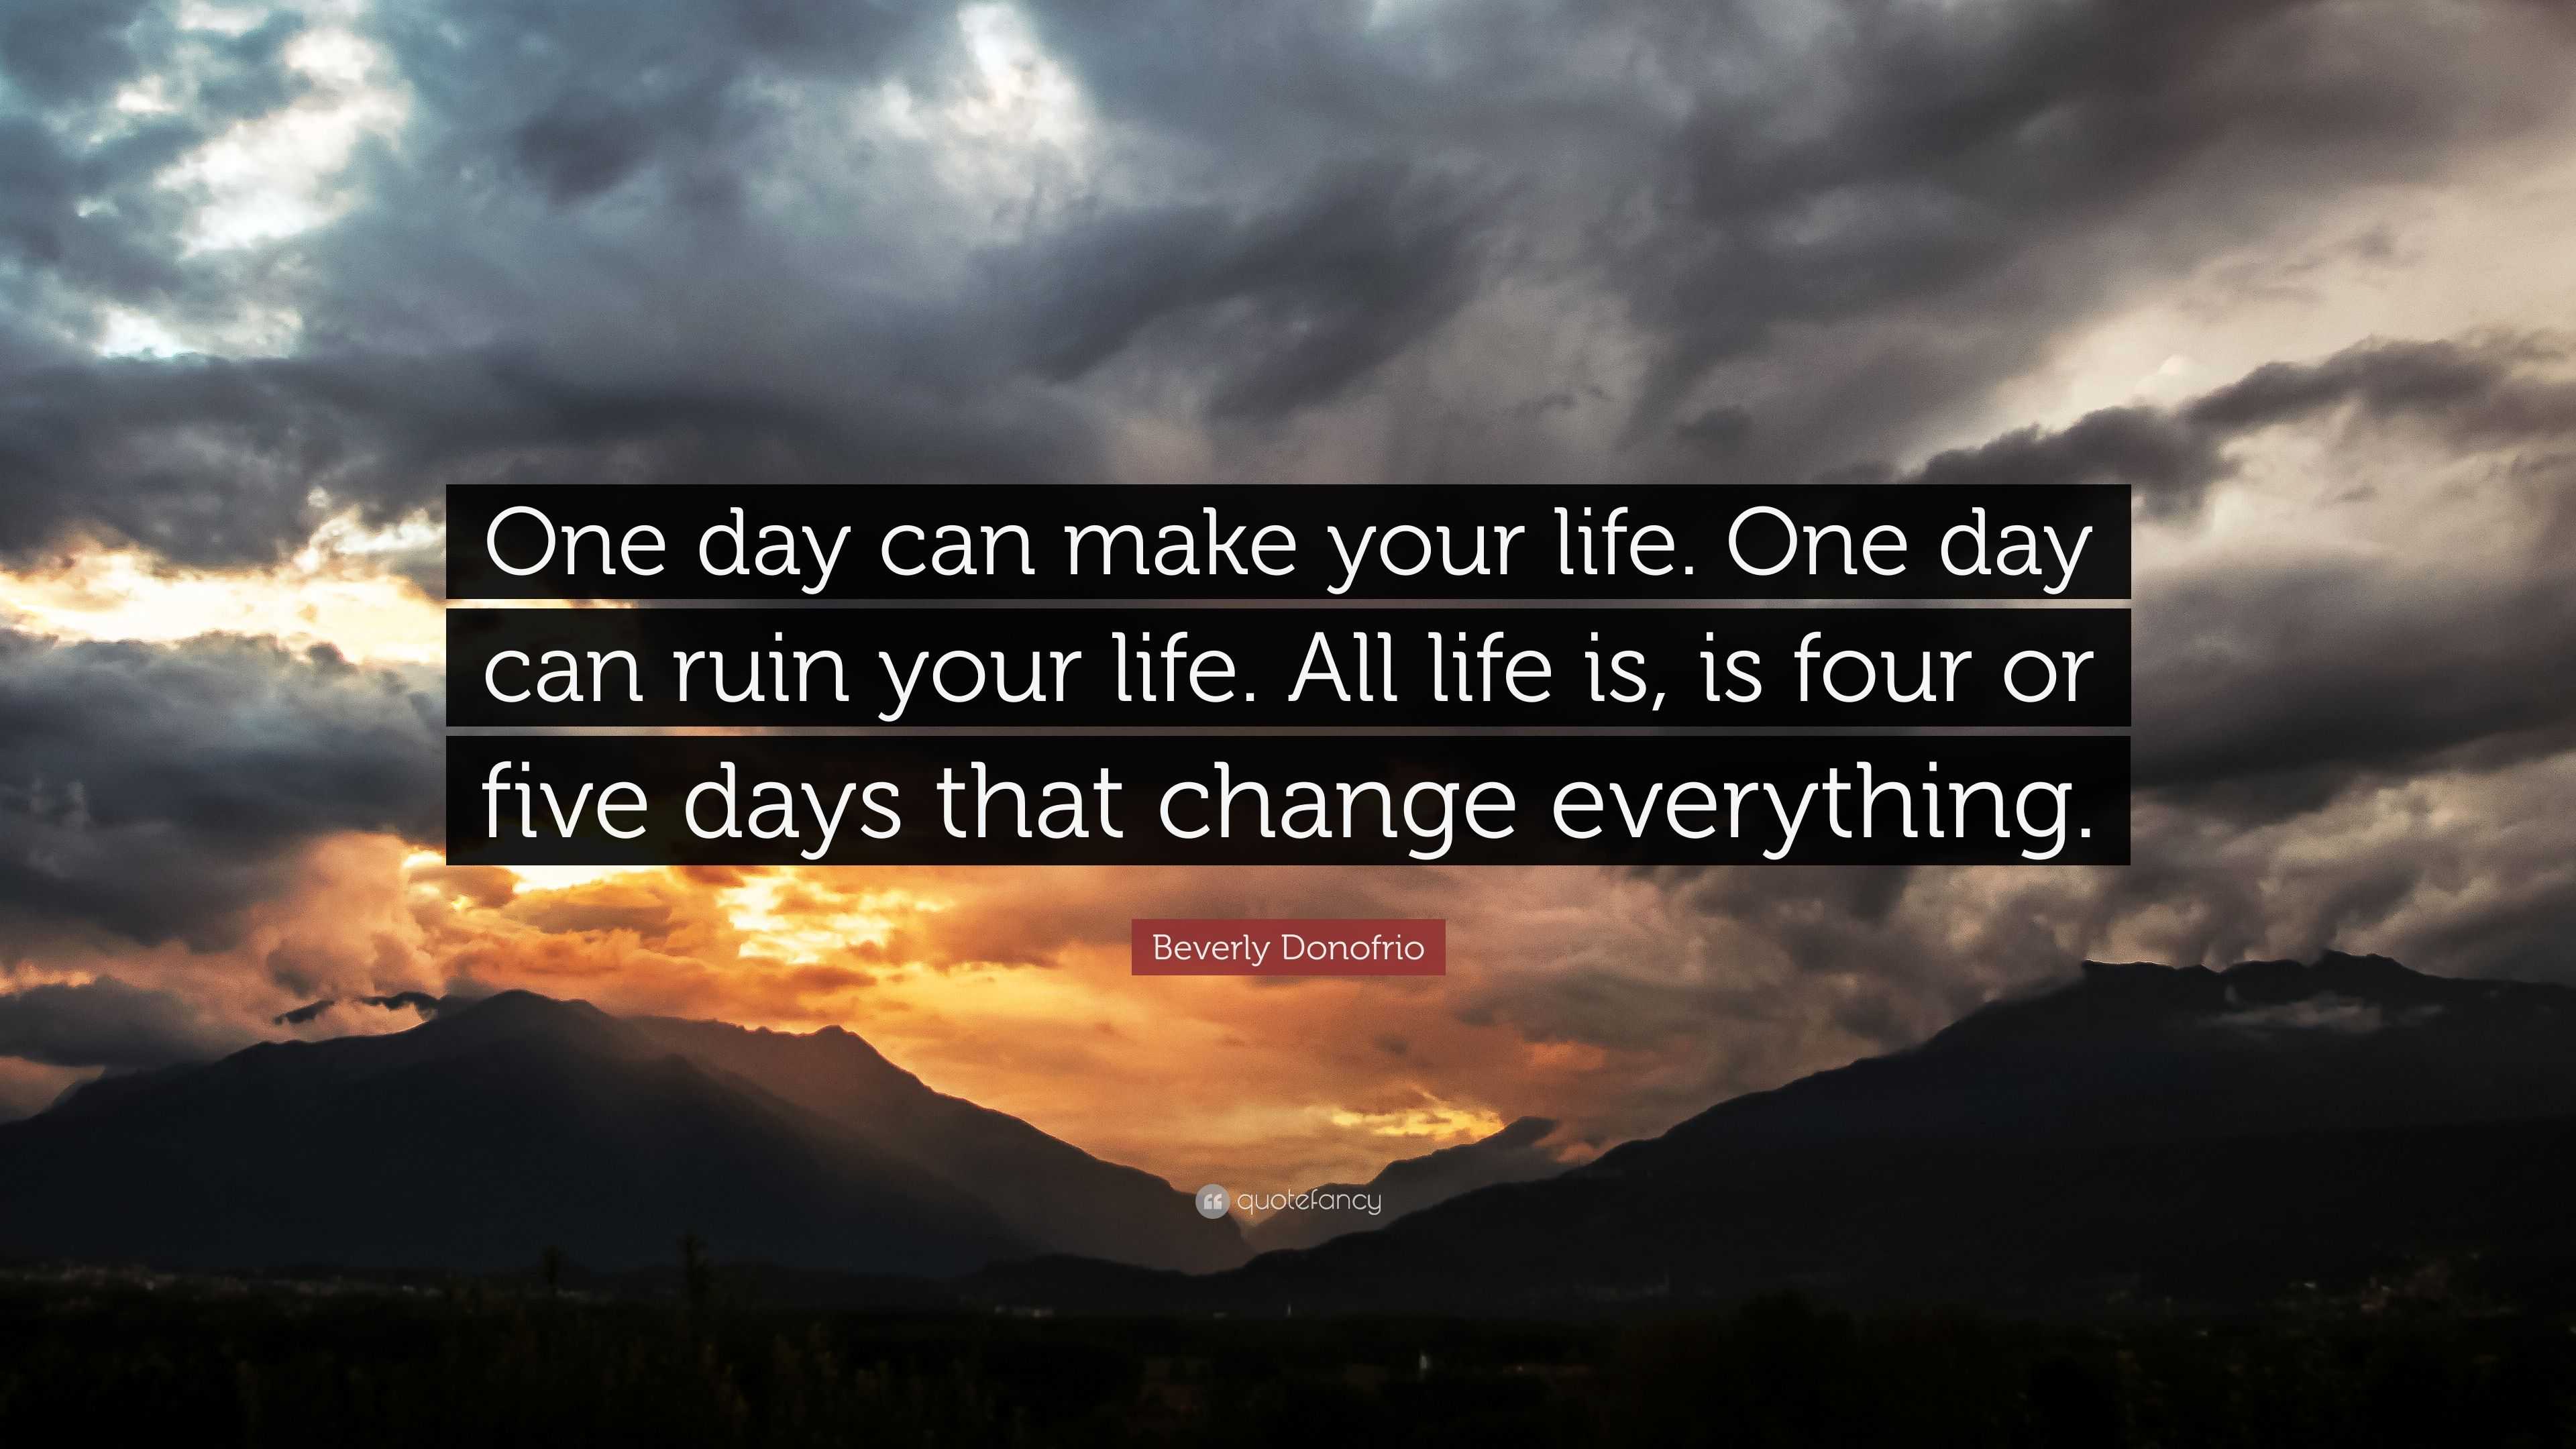 Beverly Donofrio Quote: “One day can make your life. One day can ruin ...